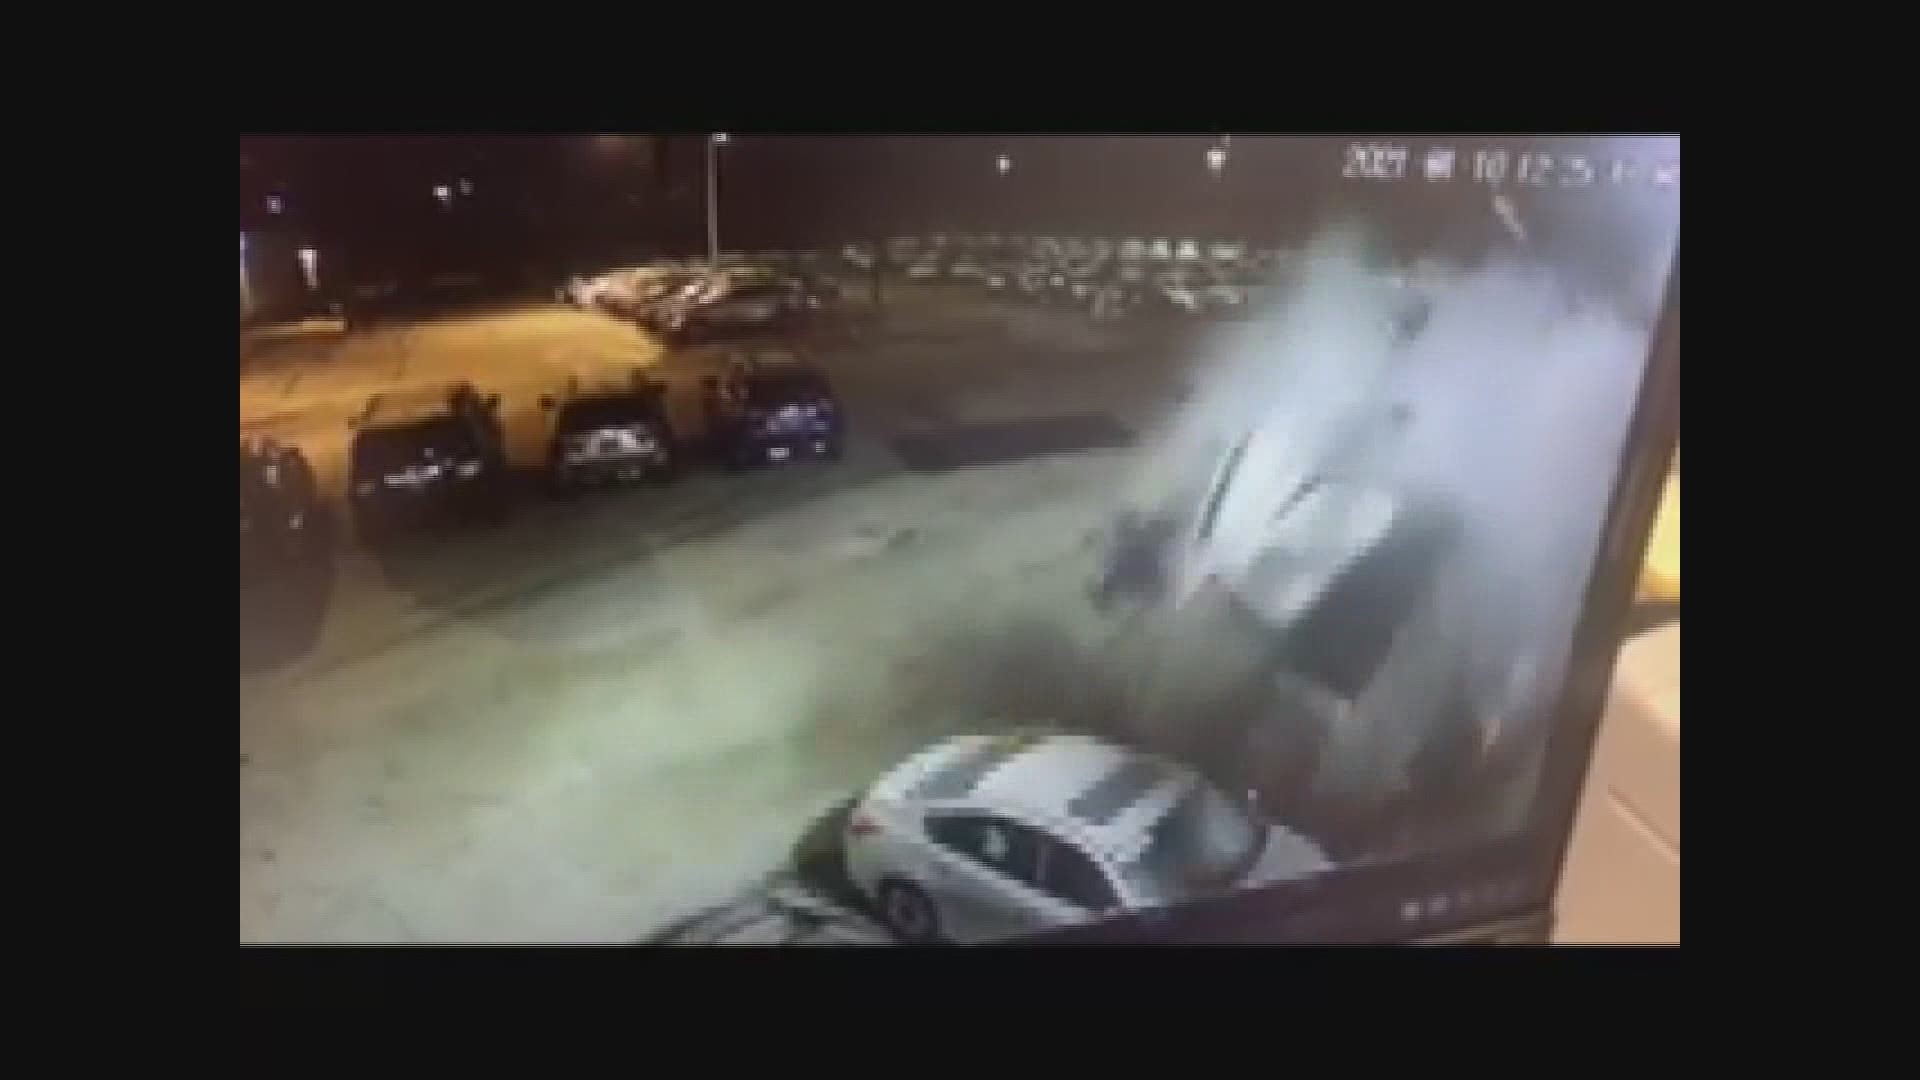 Bedford police released video of a deadly crash, which happened Jan. 9, 2021, in which a vehicle is seen colliding with several parked cars at a Nissan location.